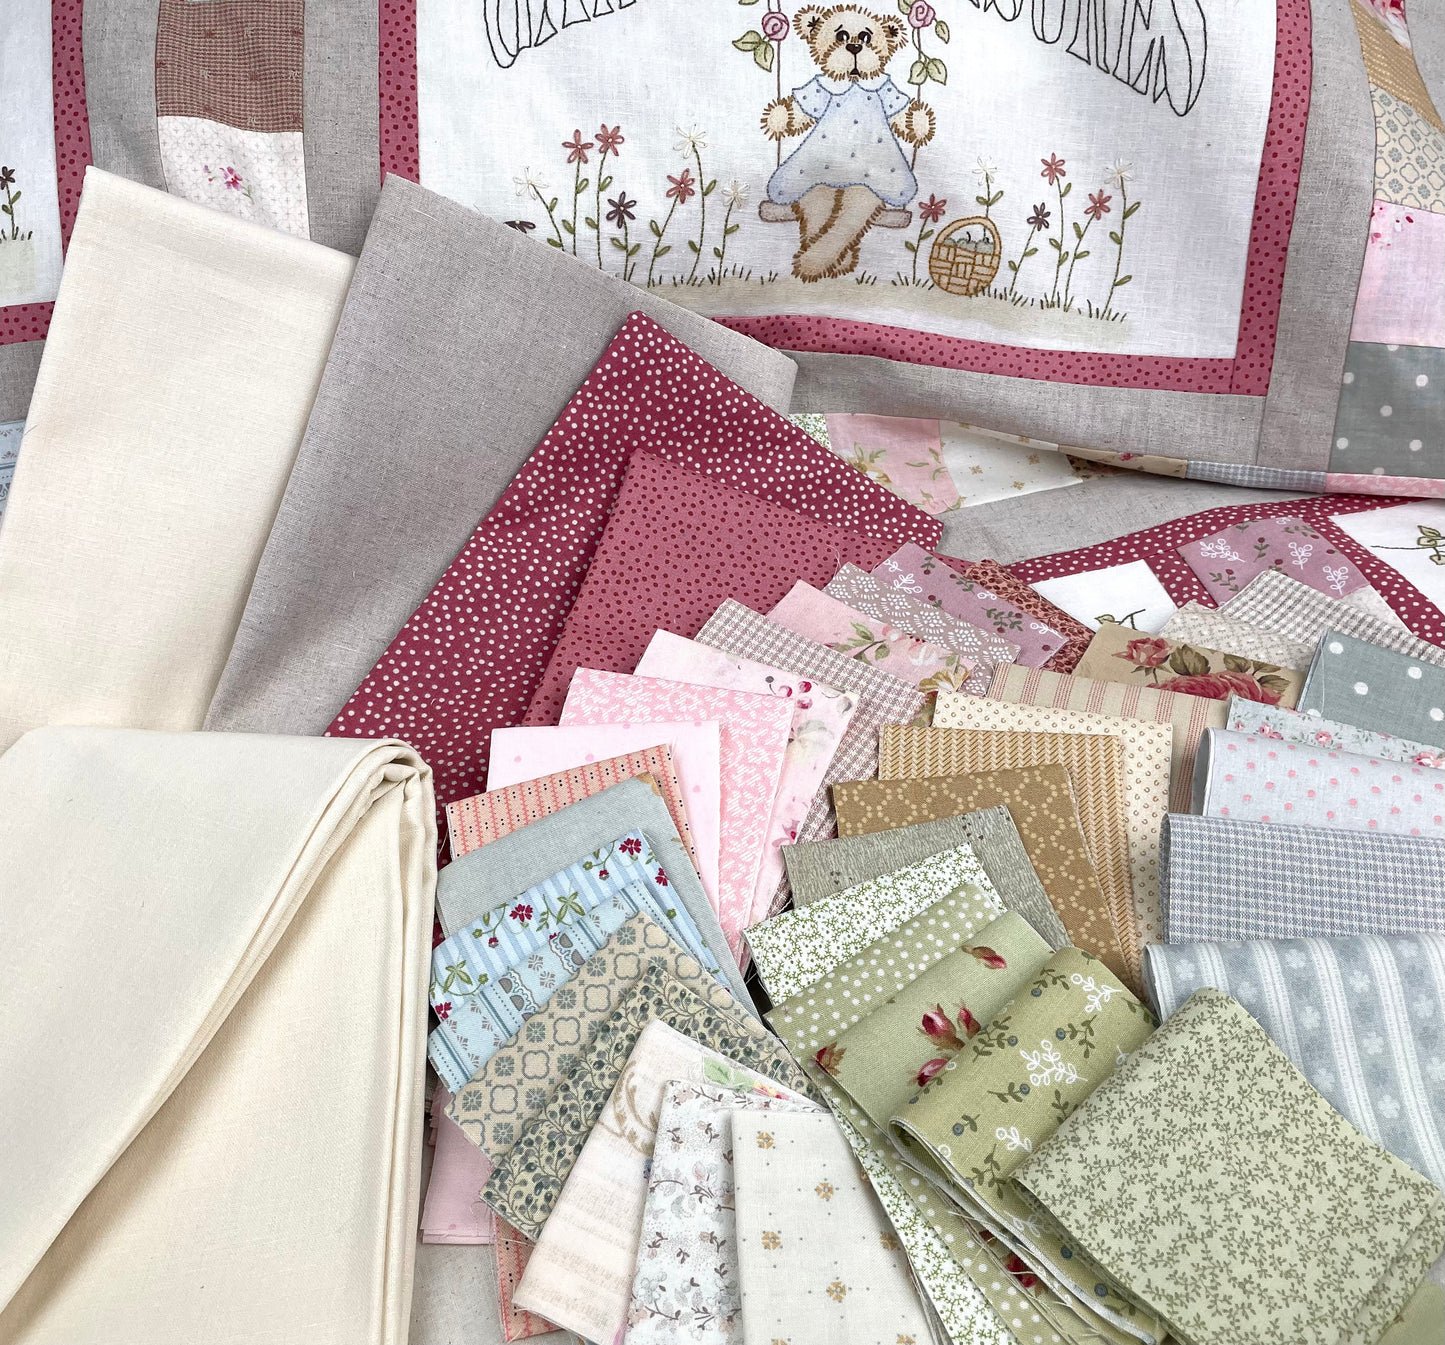 Sew with Love Teddy Quilt fabric kit